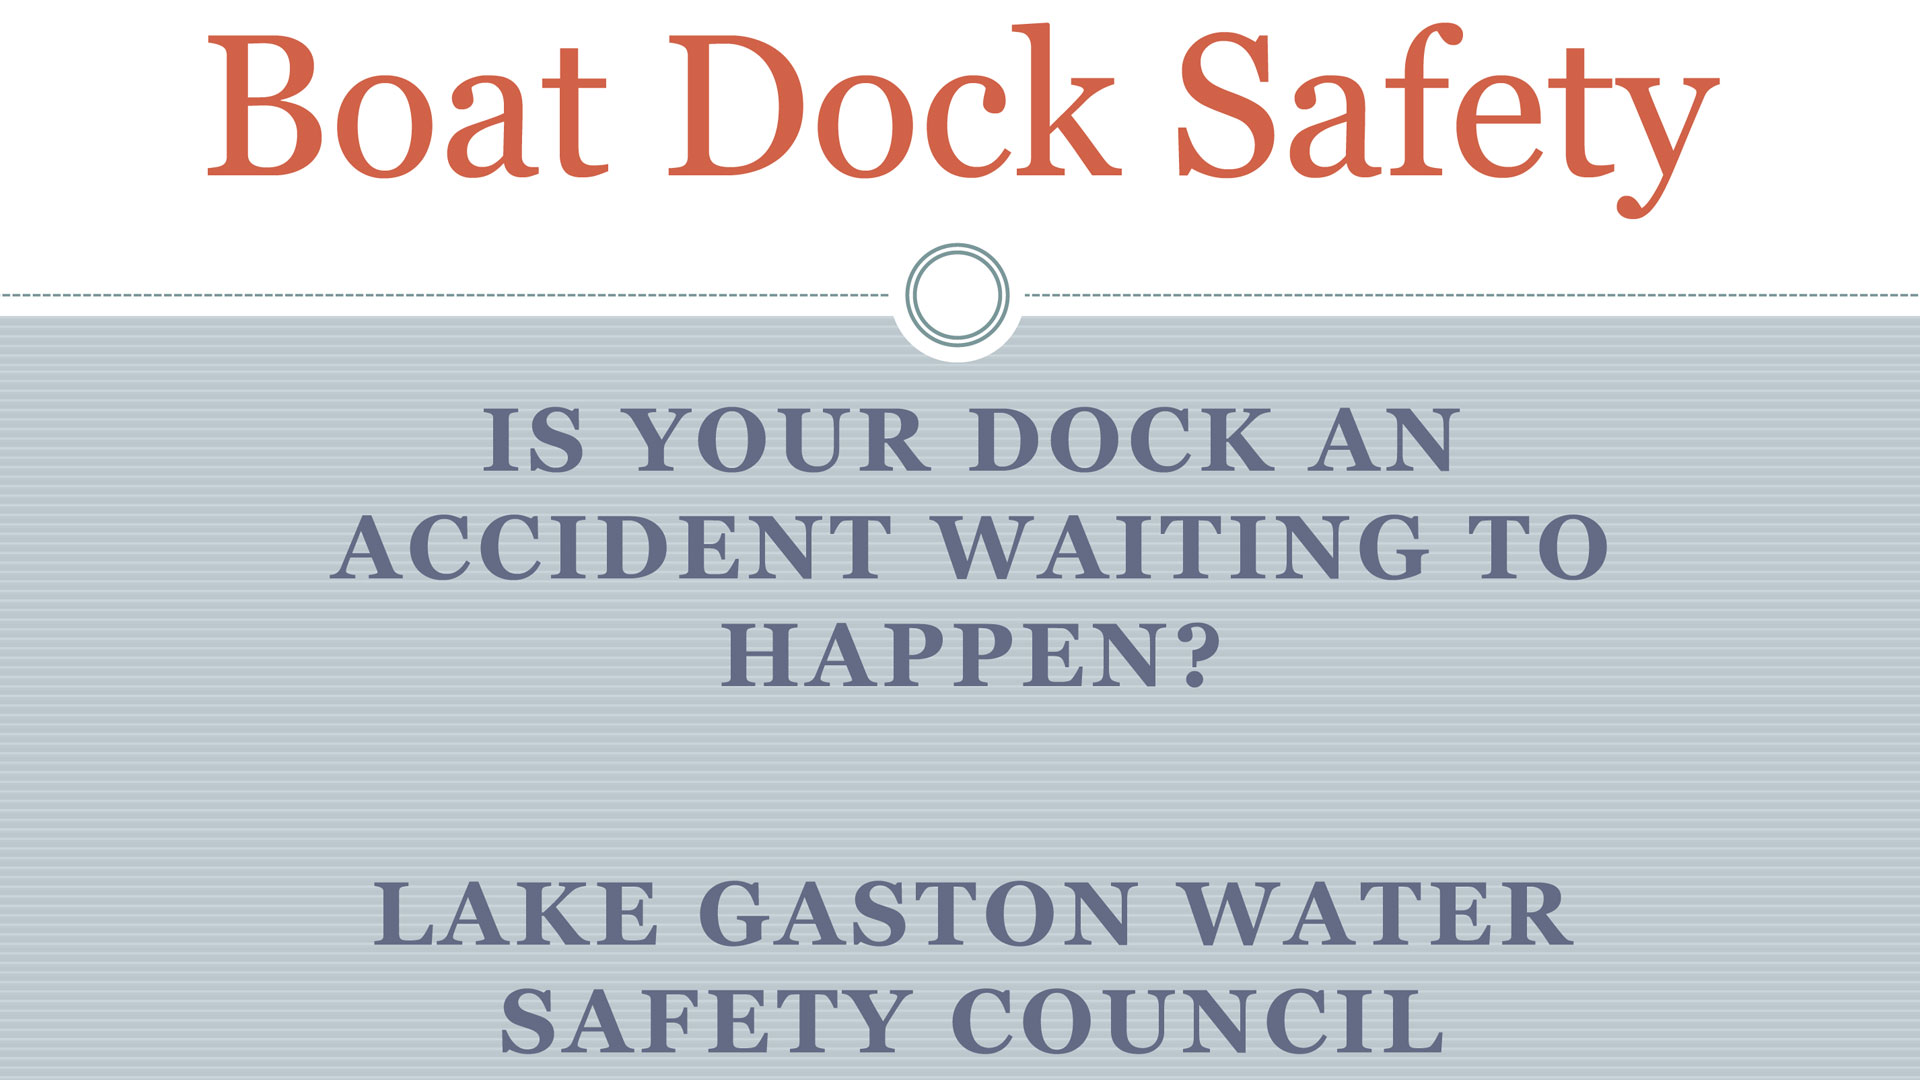 Lake Gaston Water Safety Council Boat Dock Safety